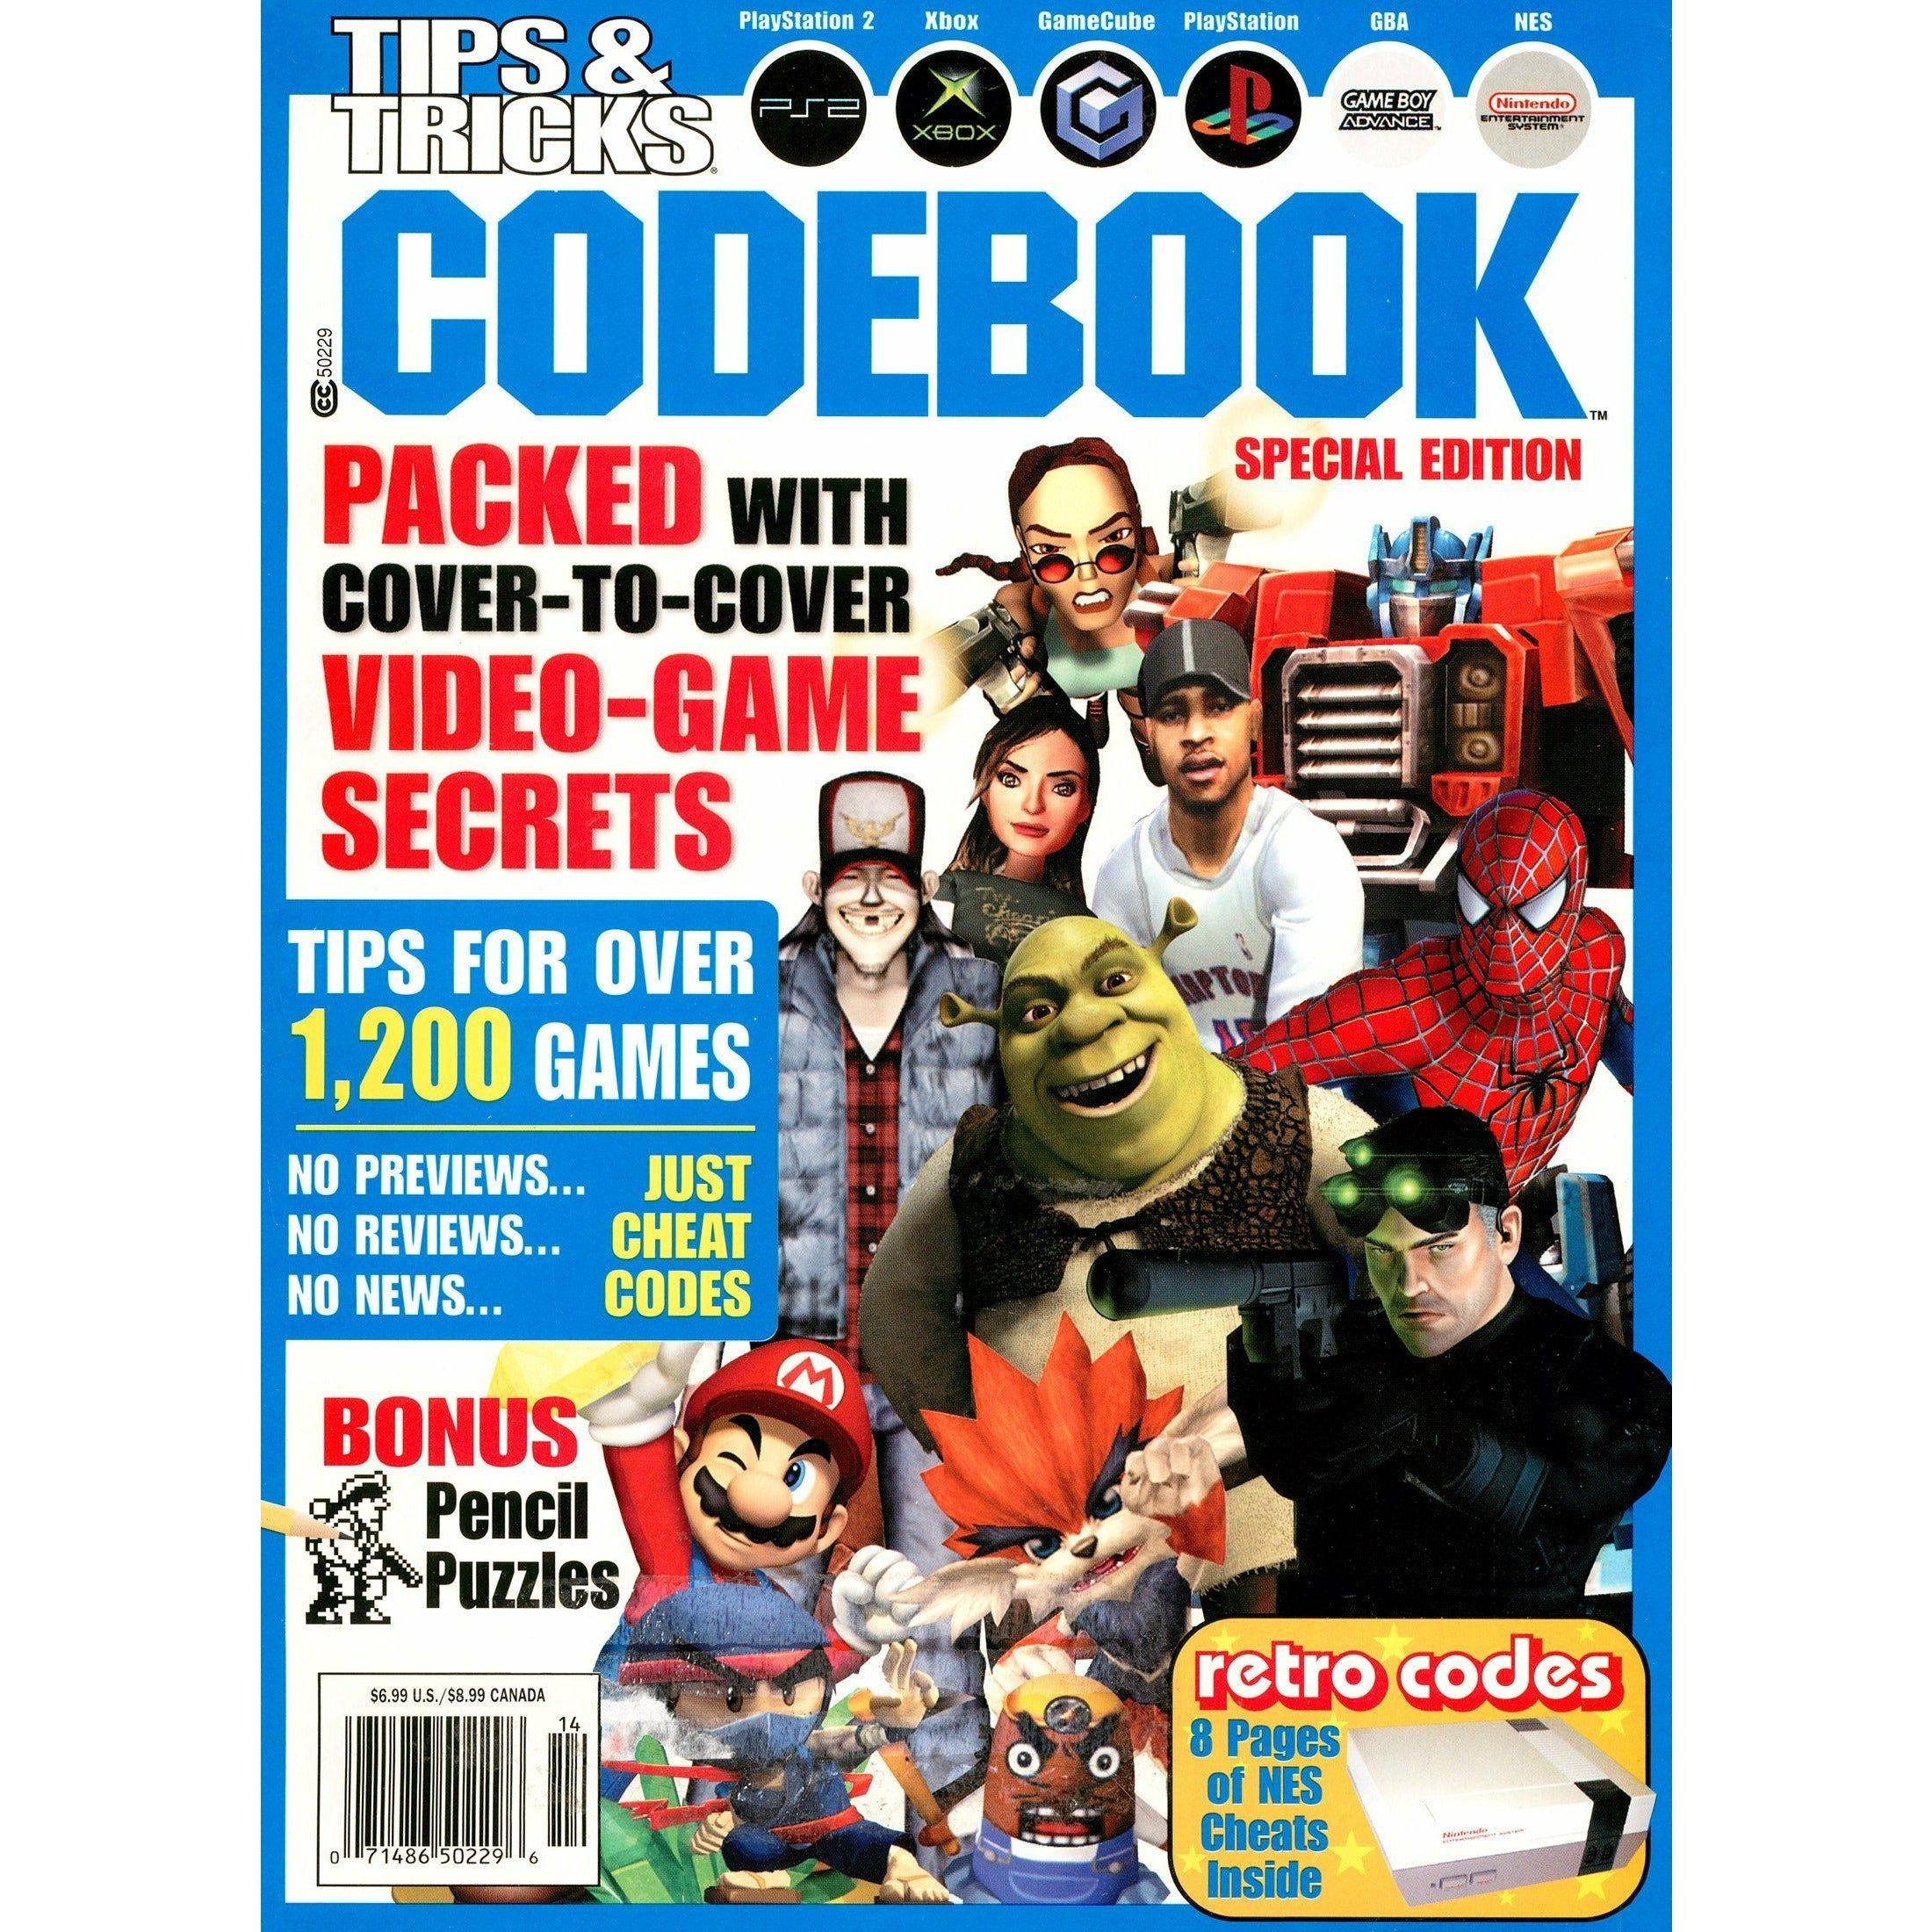 Tips & Tricks Special Edition 1999 Video-Game Codebook